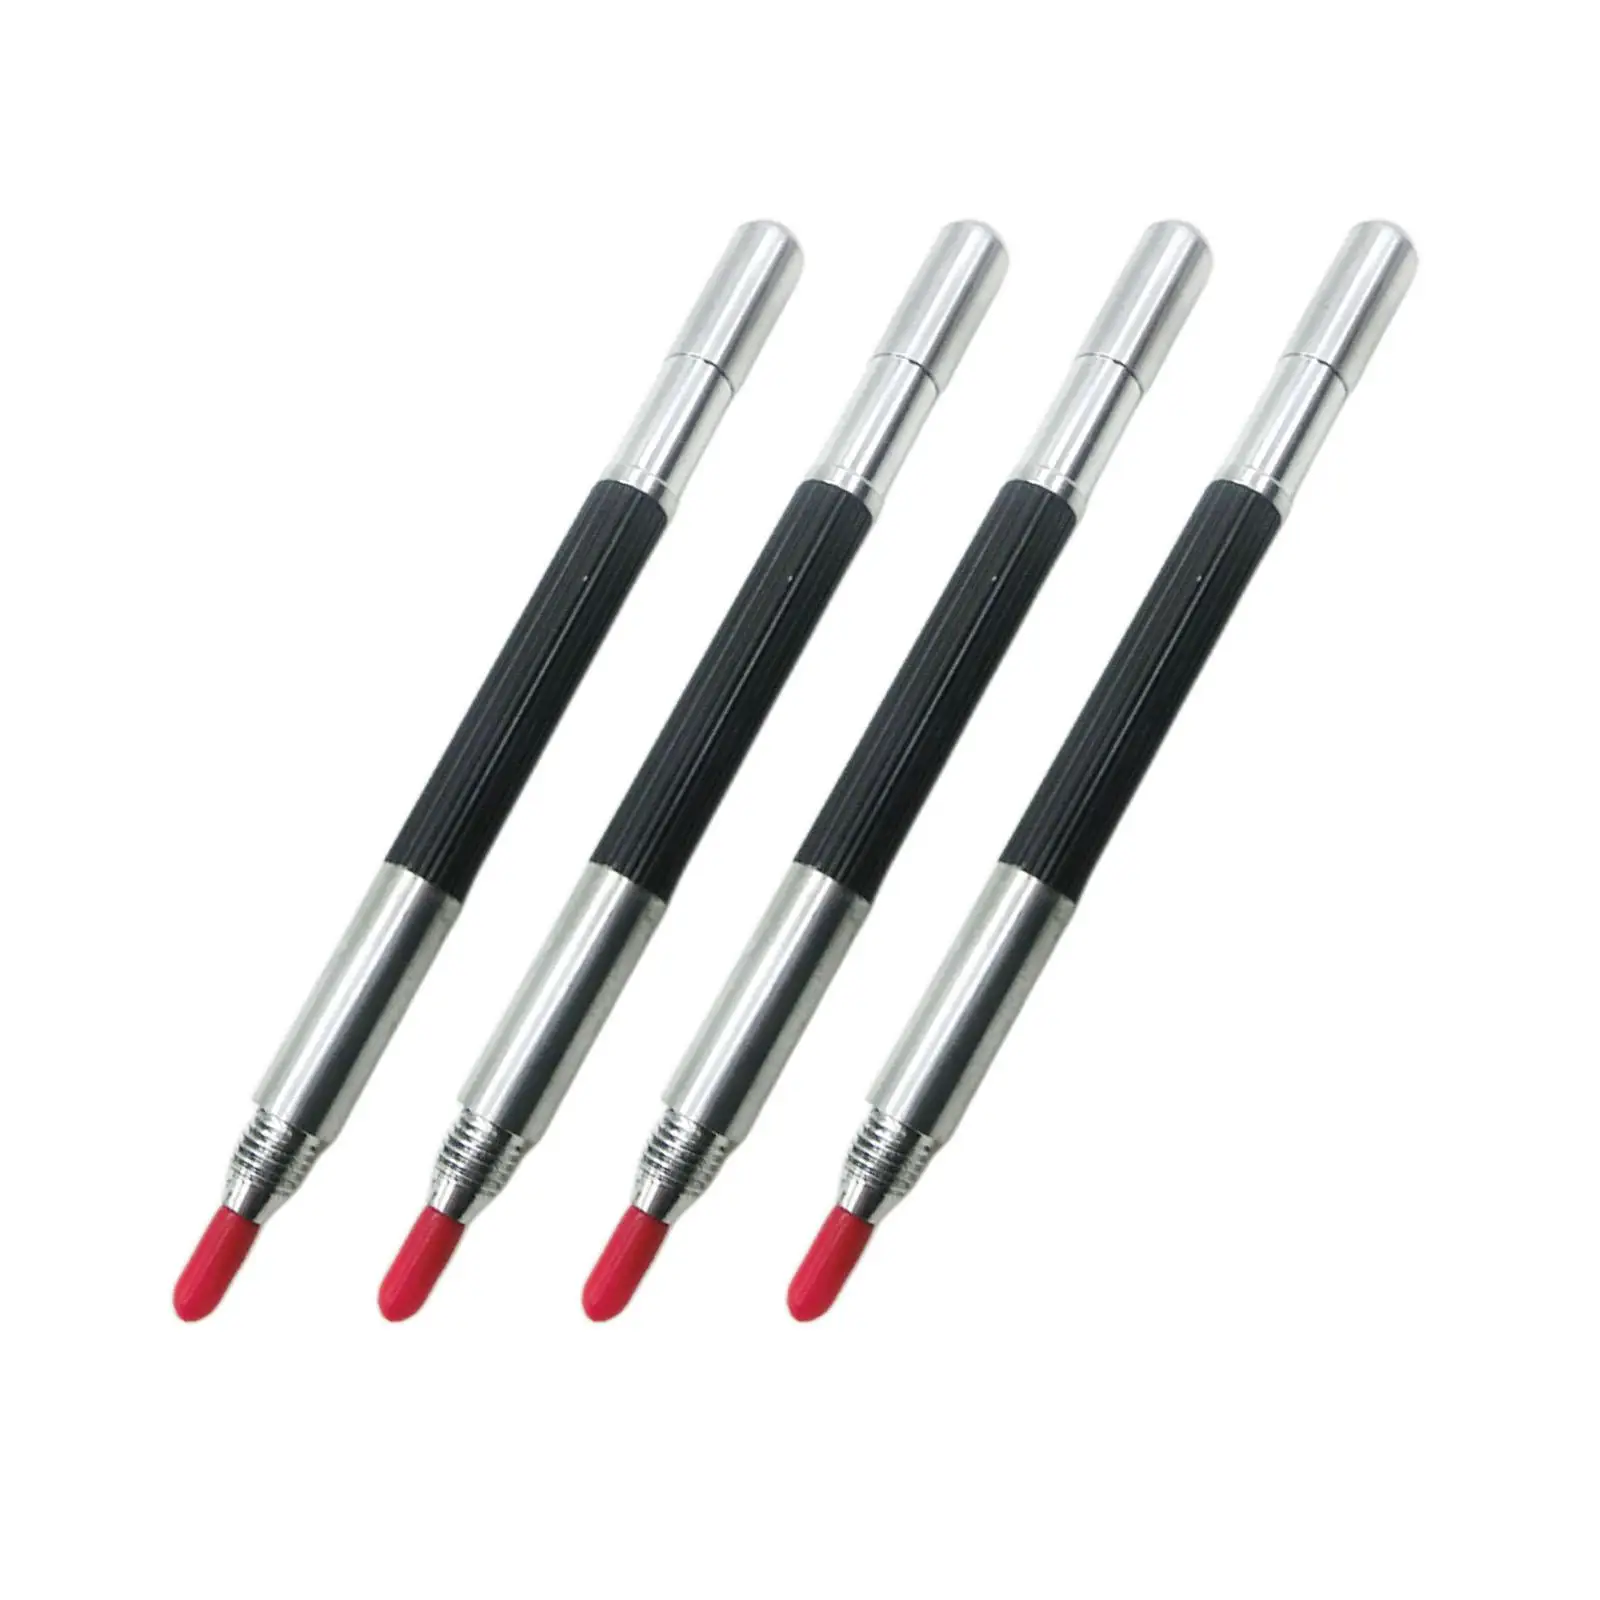 4 Pieces Hardness Engraving Pen Construction Marker Tools Cutting Engraver Tungsten Carbide Tip Scriber Pens for Hardened Steel